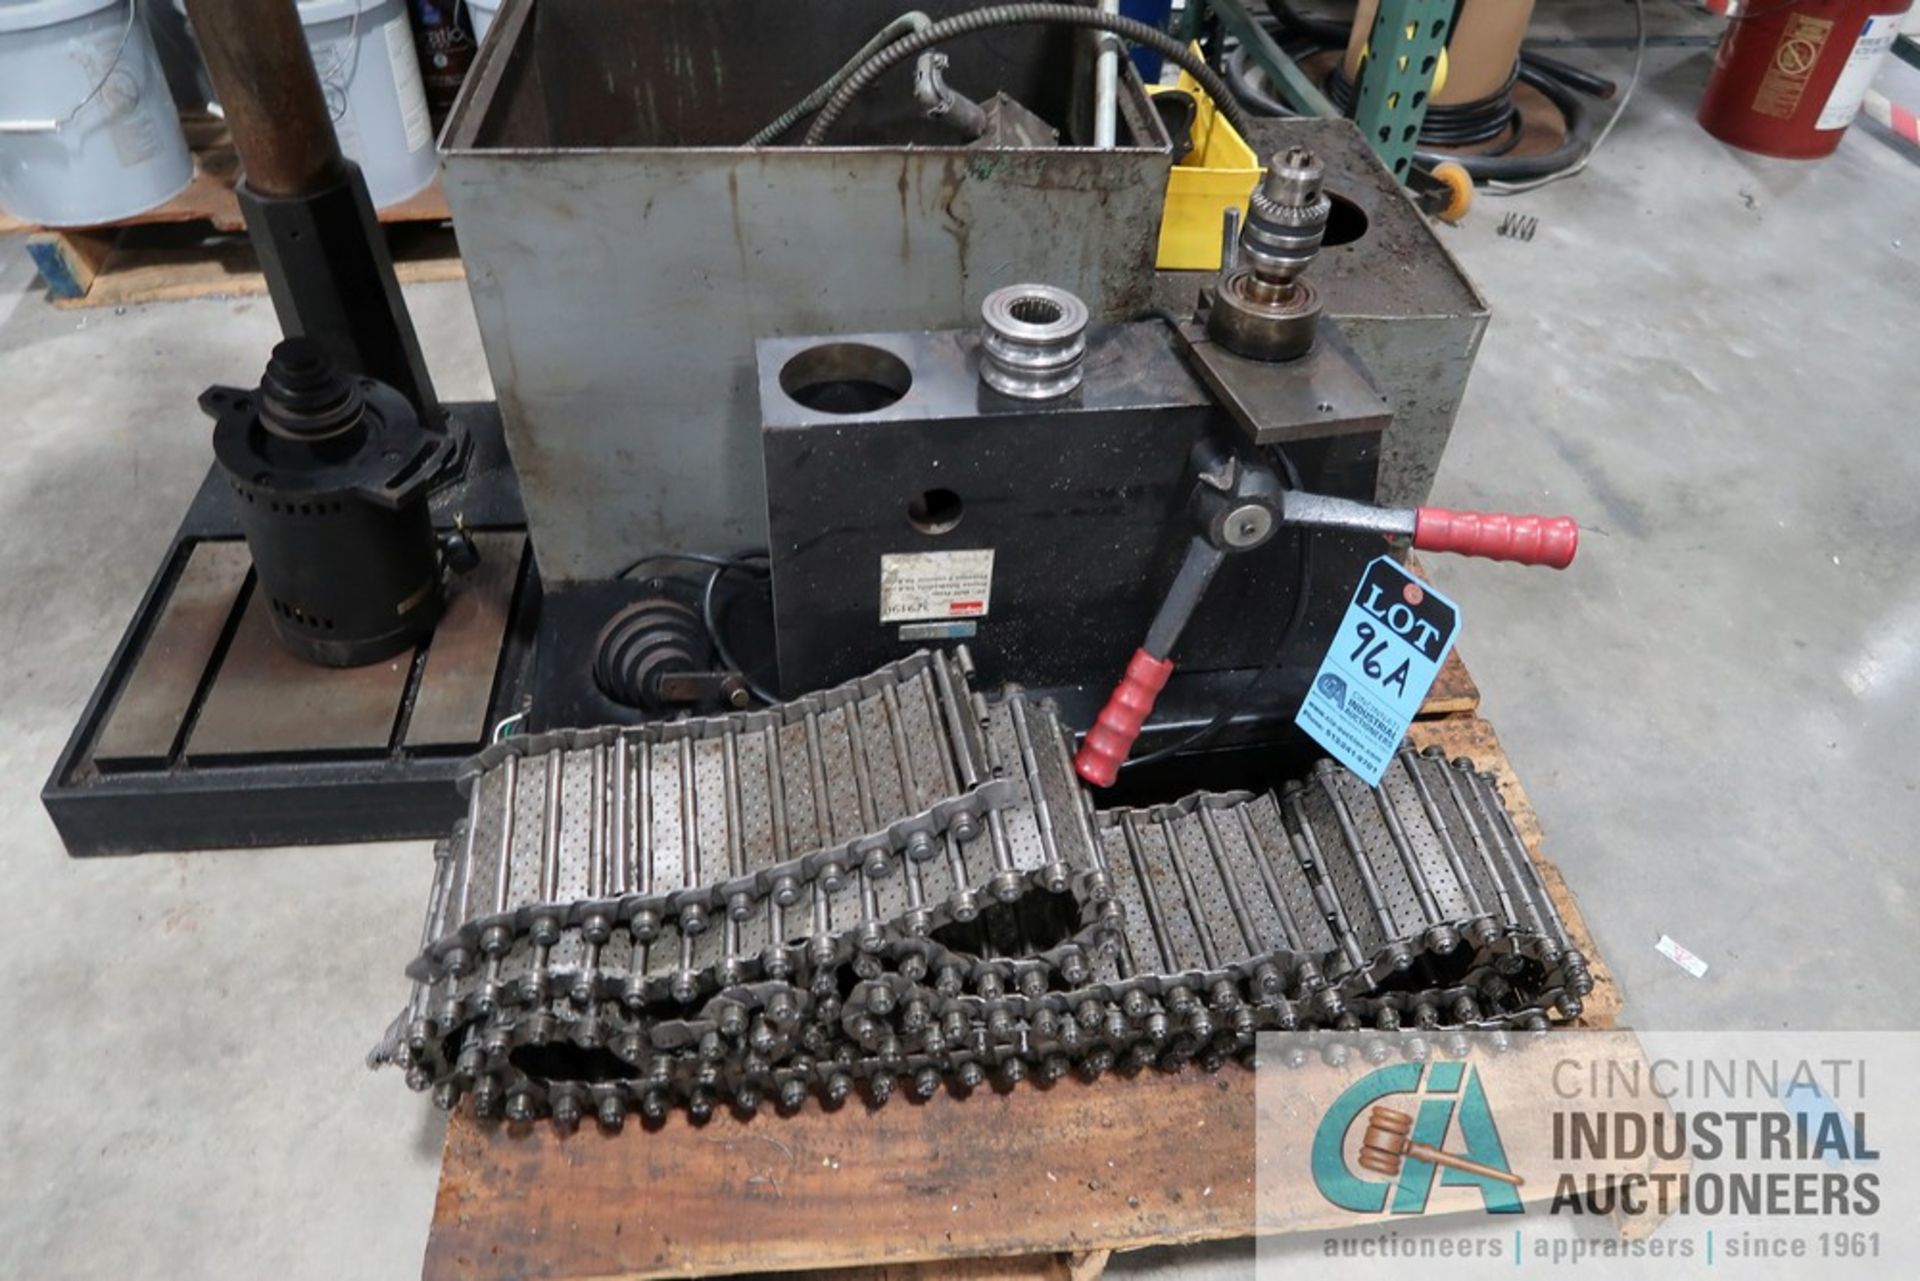 DAYTON MODEL 3Z919F DRILL PRESS, IN PIECES, BASE AND DRILL HEAD, METAL BELT CONVEYOR, COOLANT TANK - Image 2 of 5